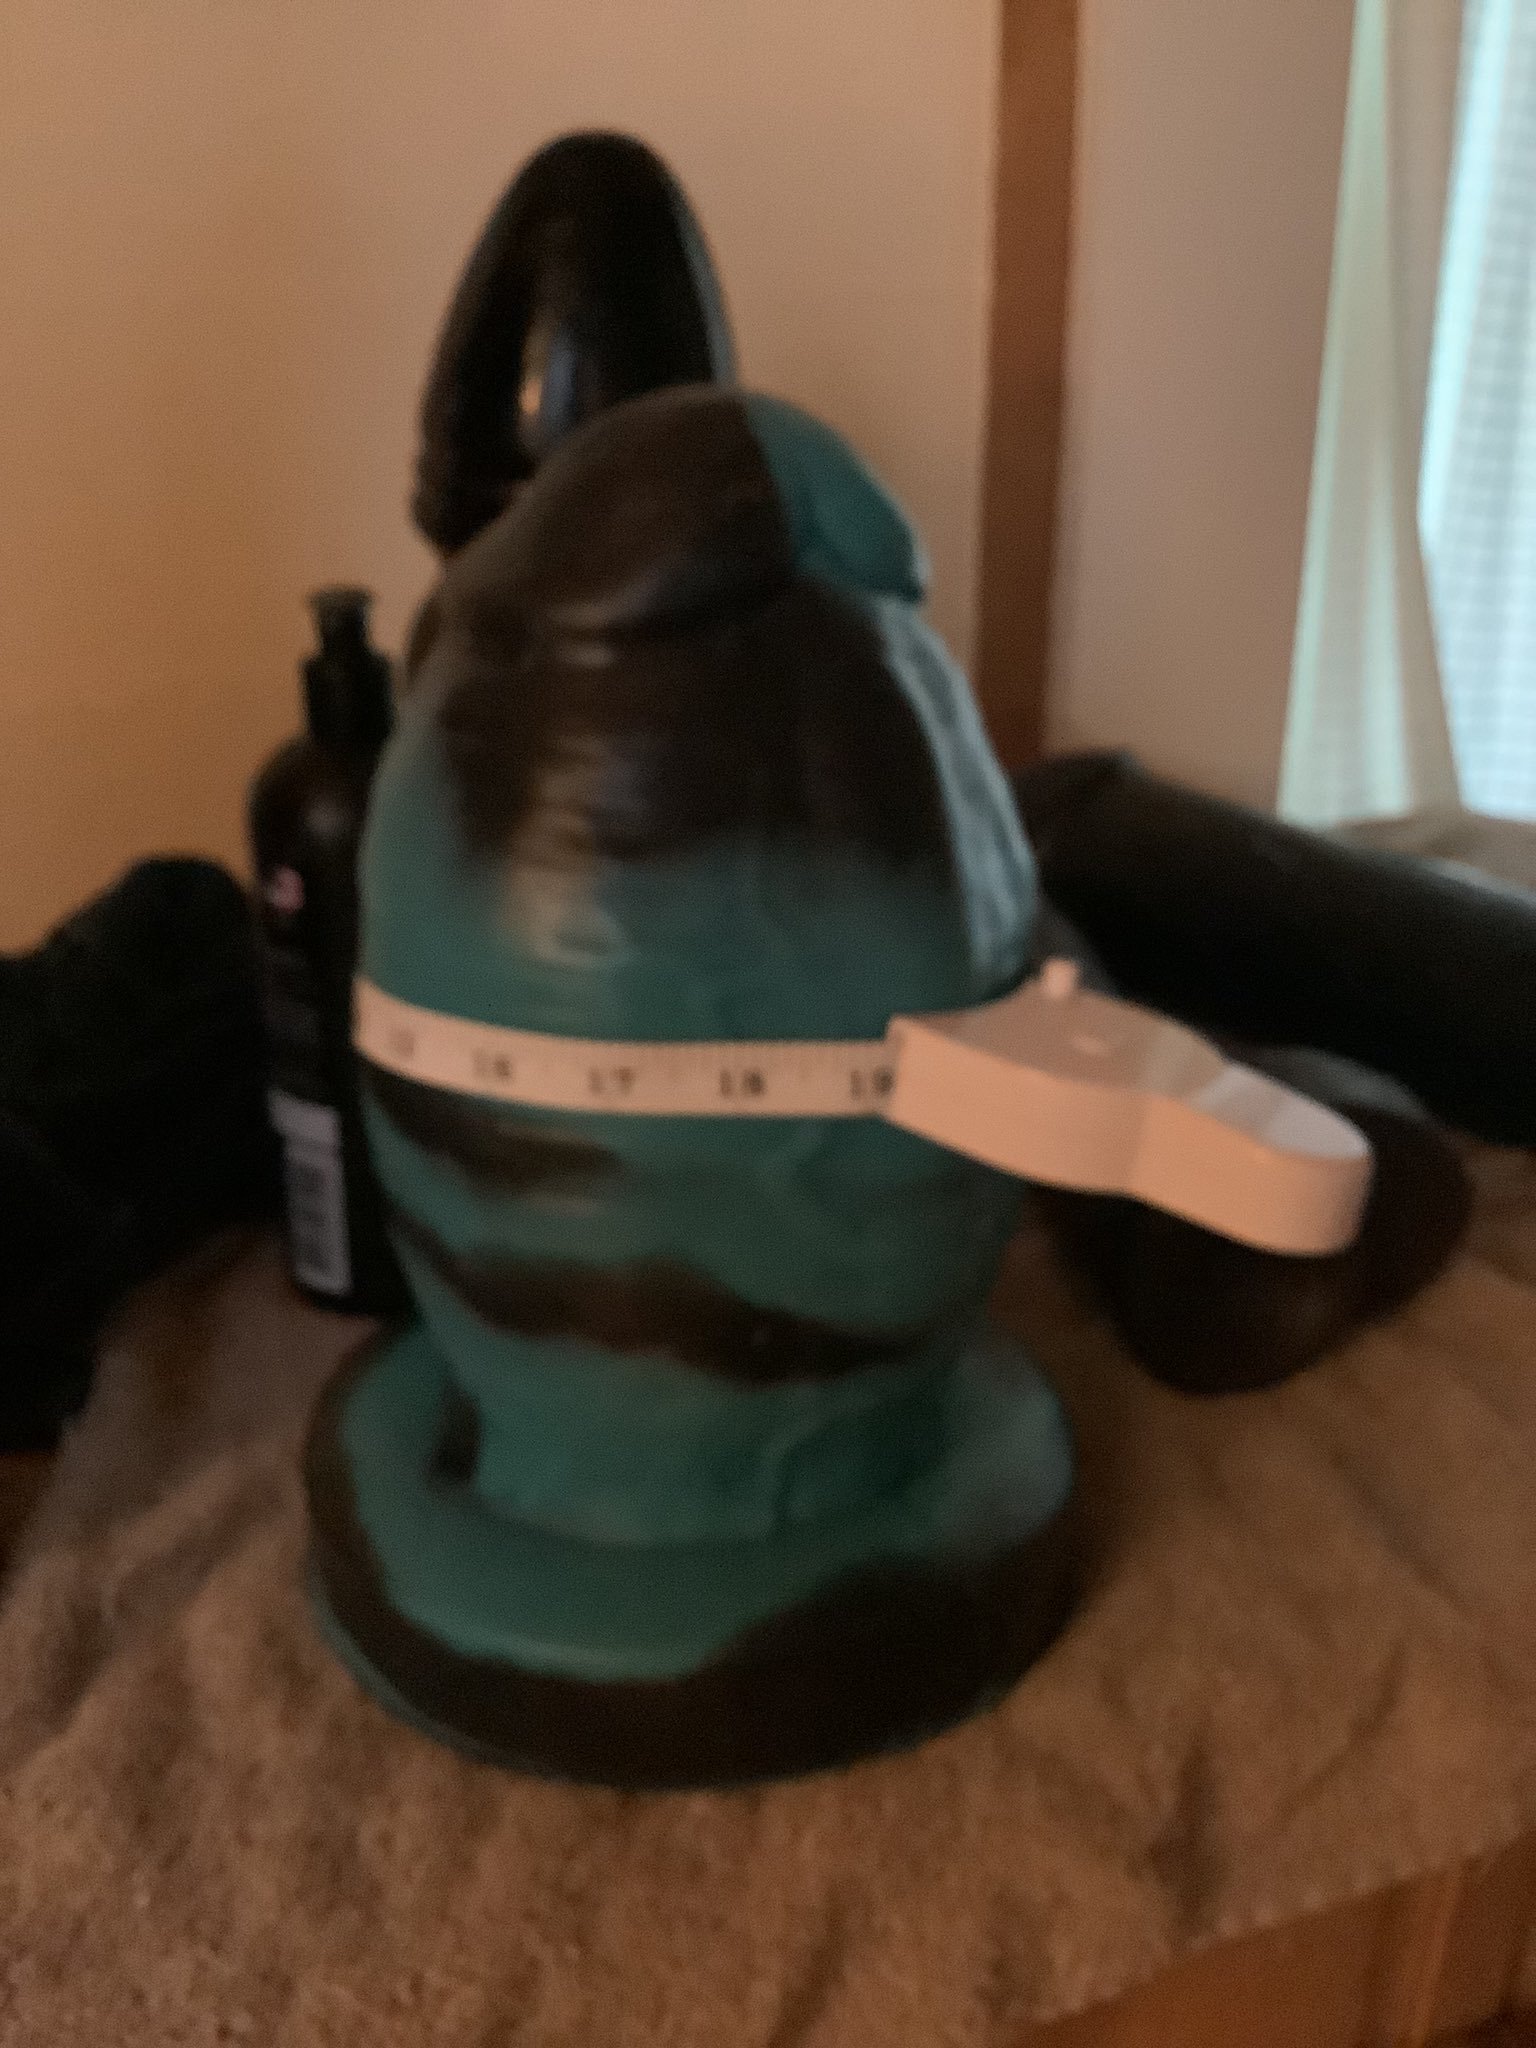 Measurements of the toys that she uses 